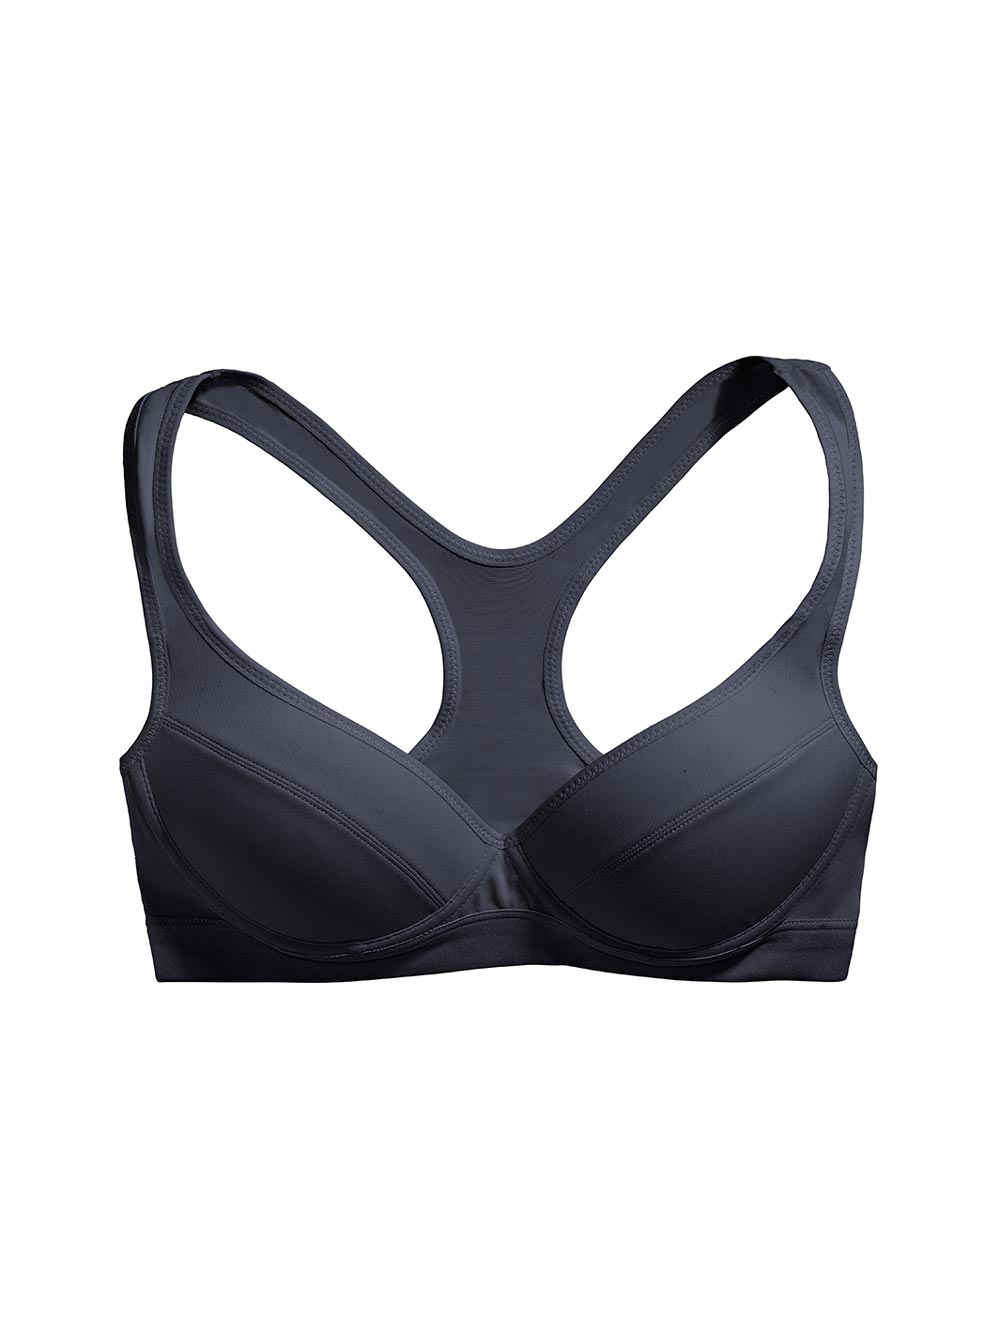 Best Sports Bra for Running, Push Up Tape, Black Bras, Bras for Small  Busts, Cotton Sports Bra, Wireless Push Up Bra, Wired Bra, Cute Sports Bras,  Underwear Sports BraExtreme Boost Push Up